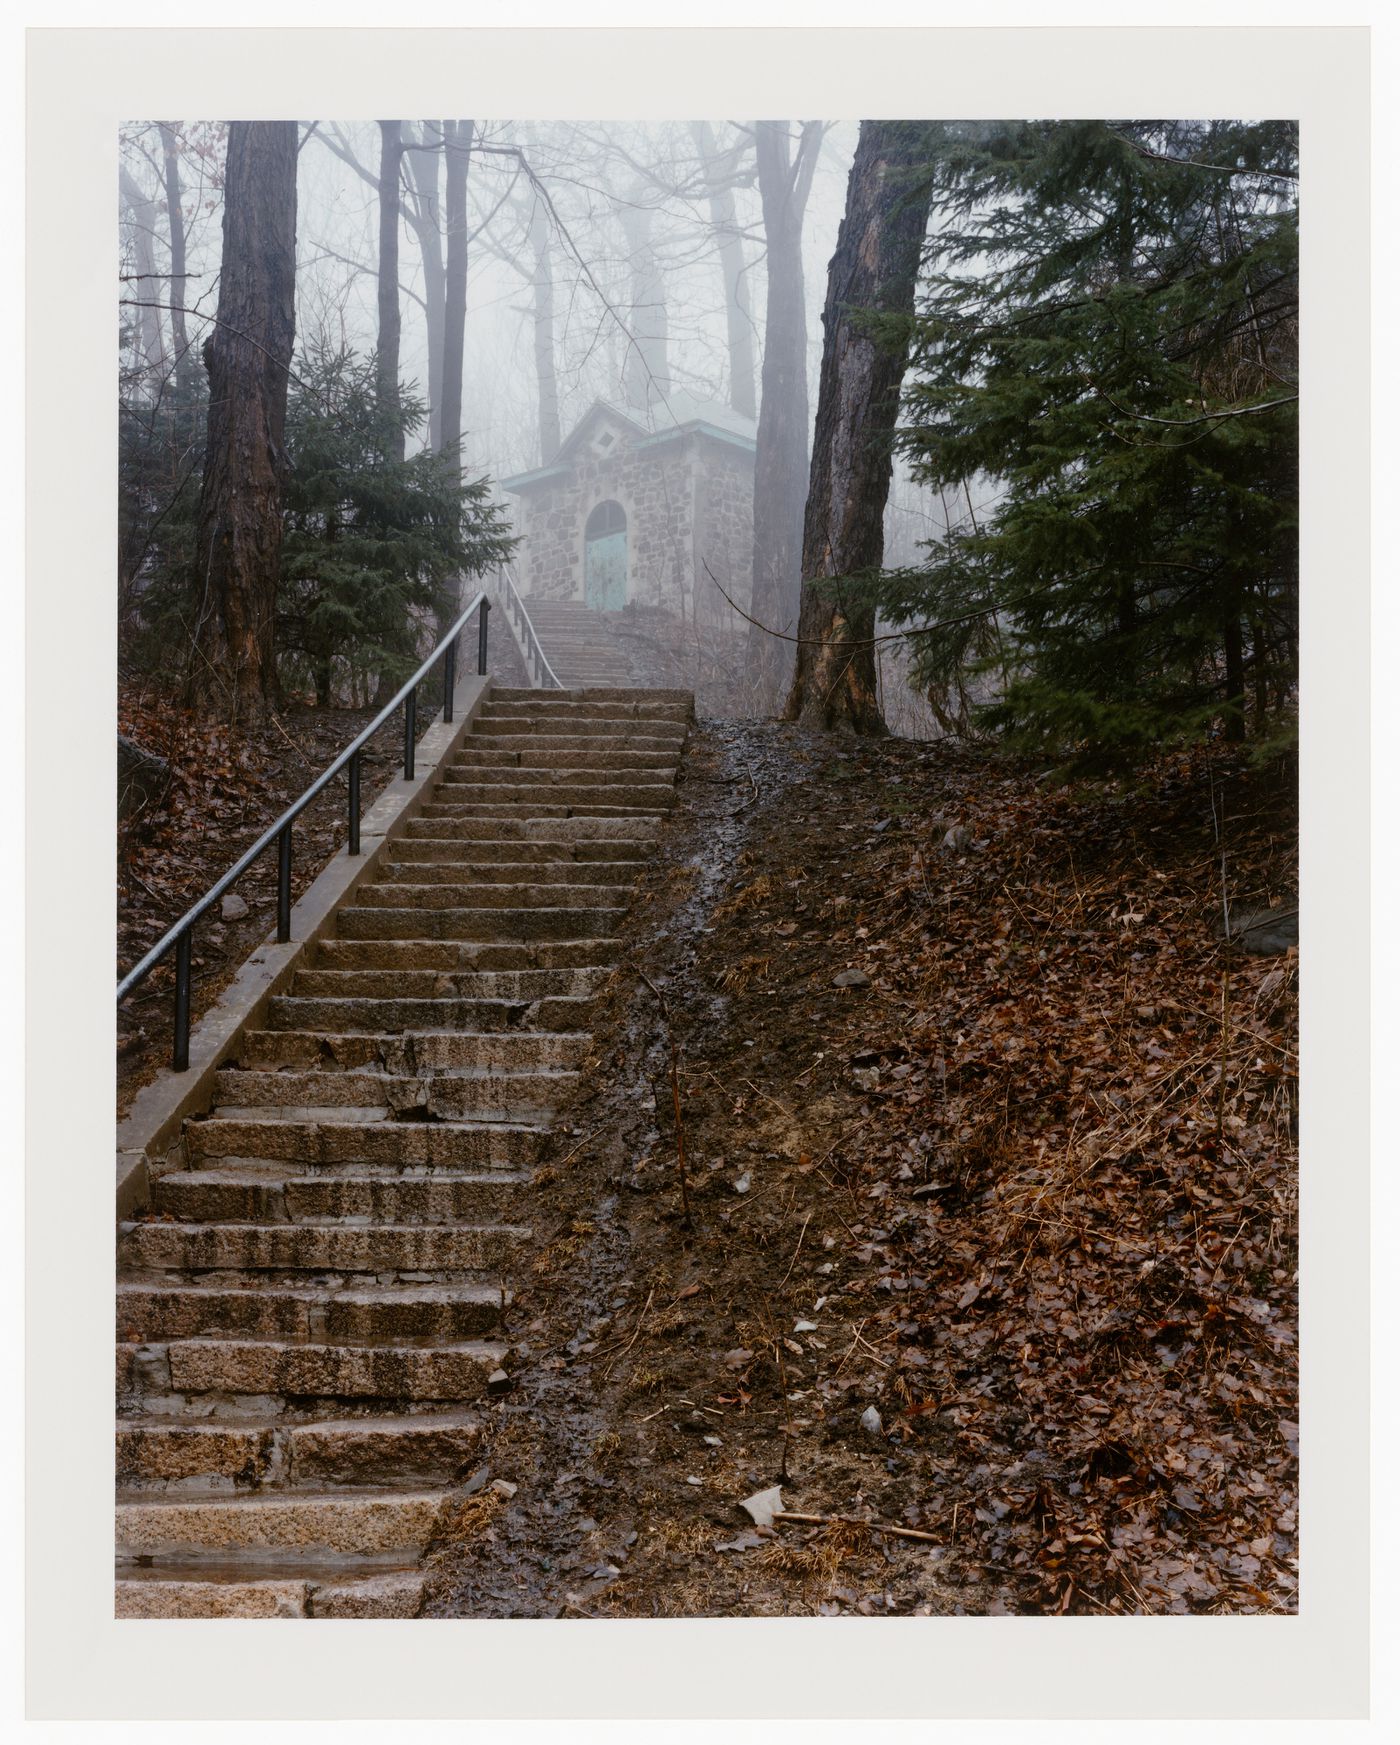 Viewing Olmsted: View of Stairway and service shed, Mont Royal, Montréal, Québec